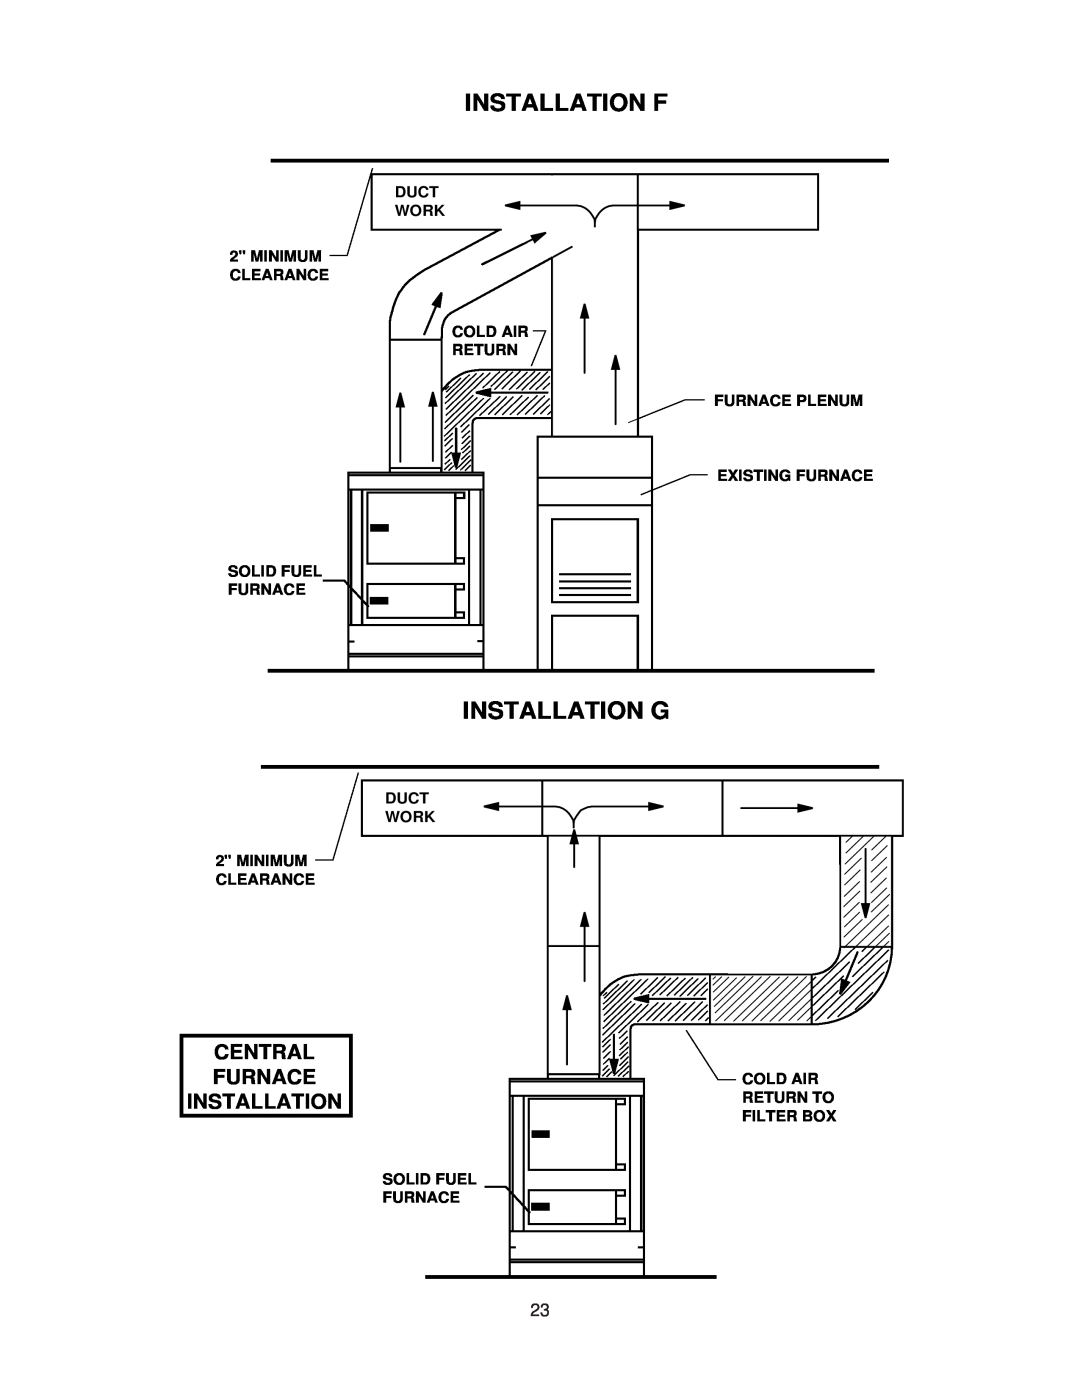 United States Stove AIR, 1303 warranty Installation F, Installation G, Central Furnace Installation 